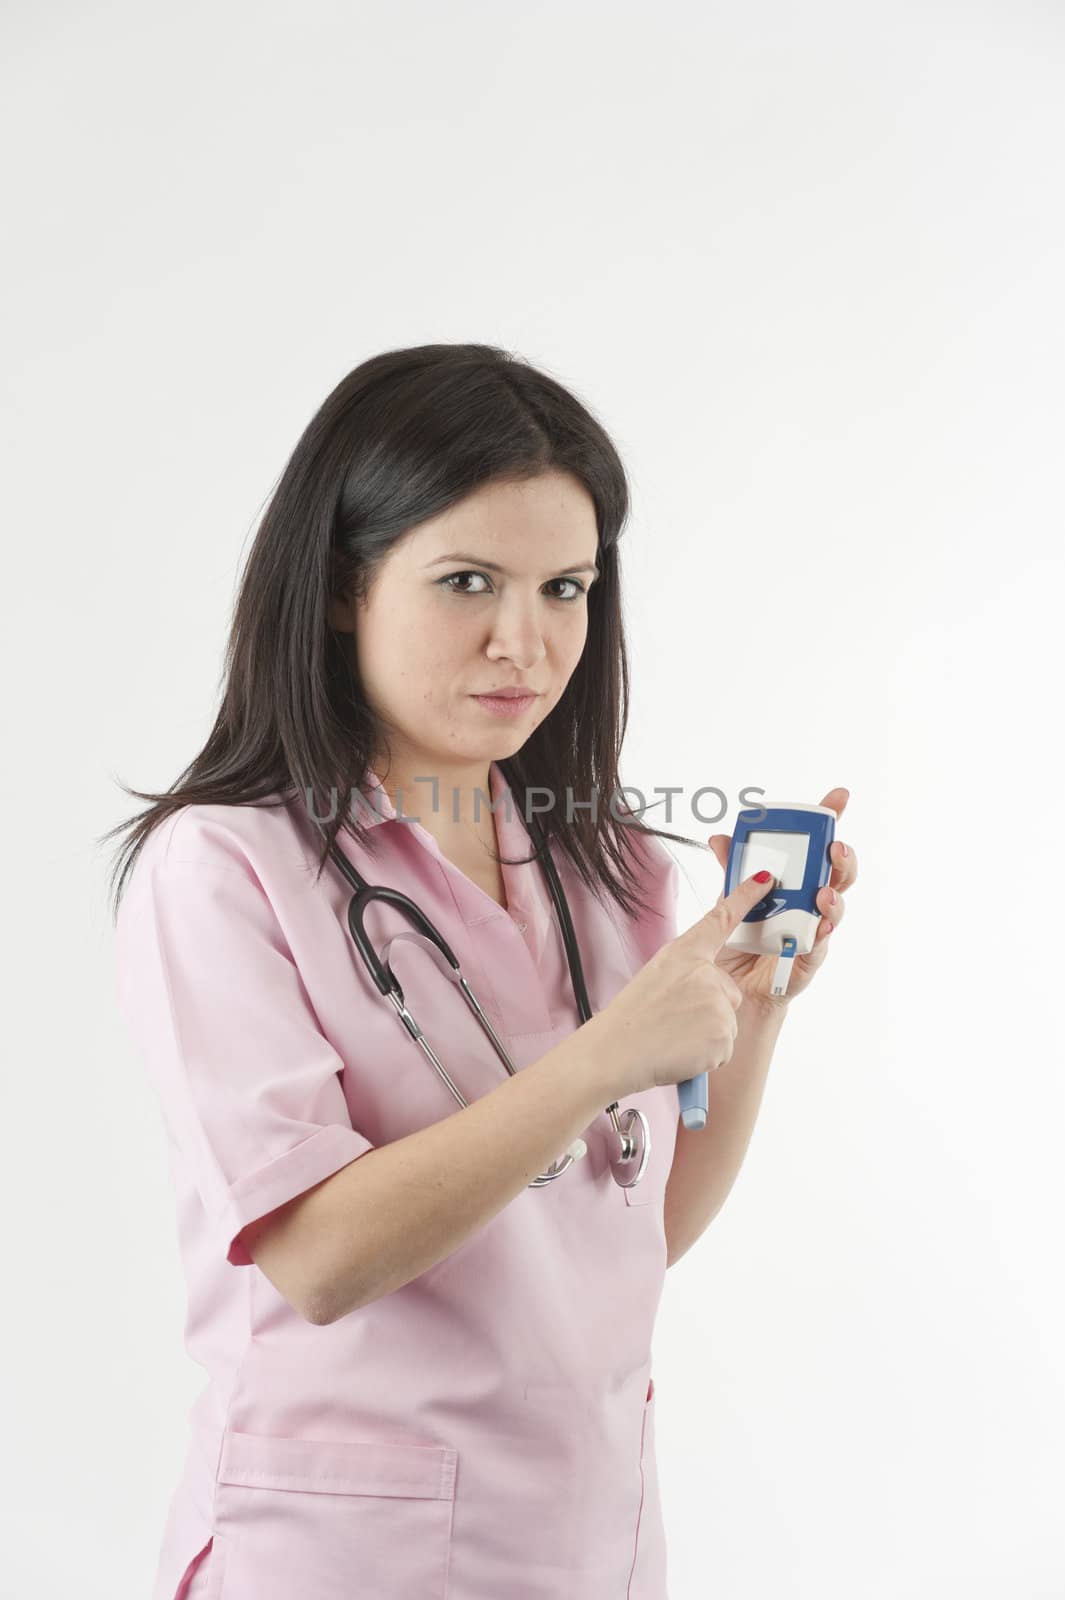 Nurse ready with stethoscope and glucometer